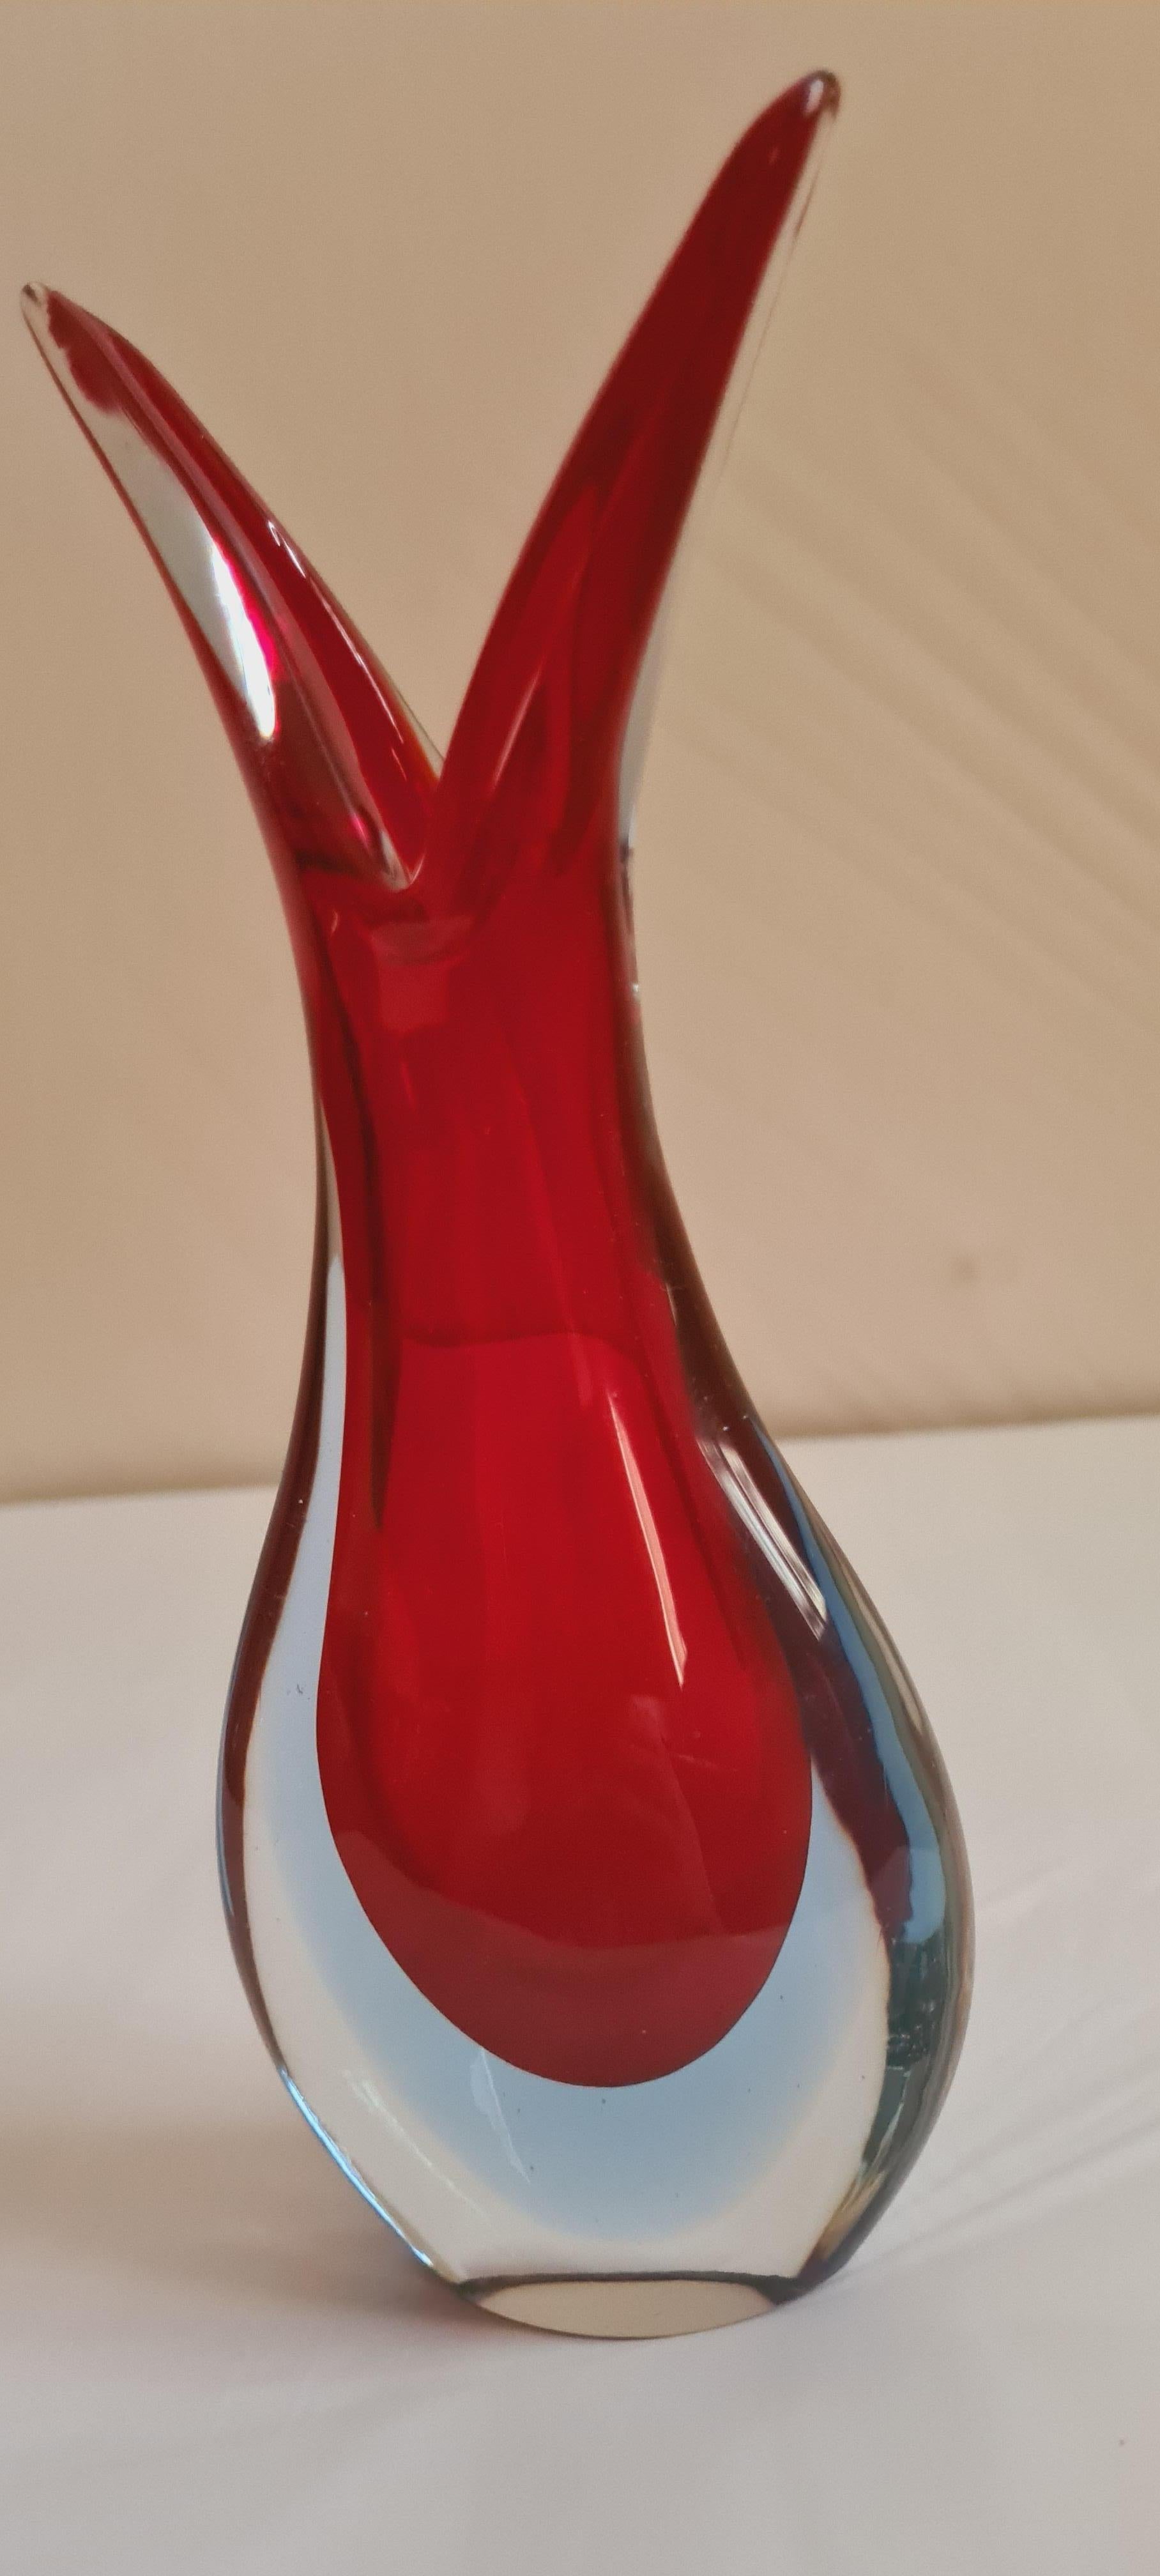 Beautiful Murano glass sommerso vase and carafe in red, blue and clear, attributed to Flavio Poli; years 1950-1960. The carafe is 30cm and the vase is 20cm tall. In excellent condition.